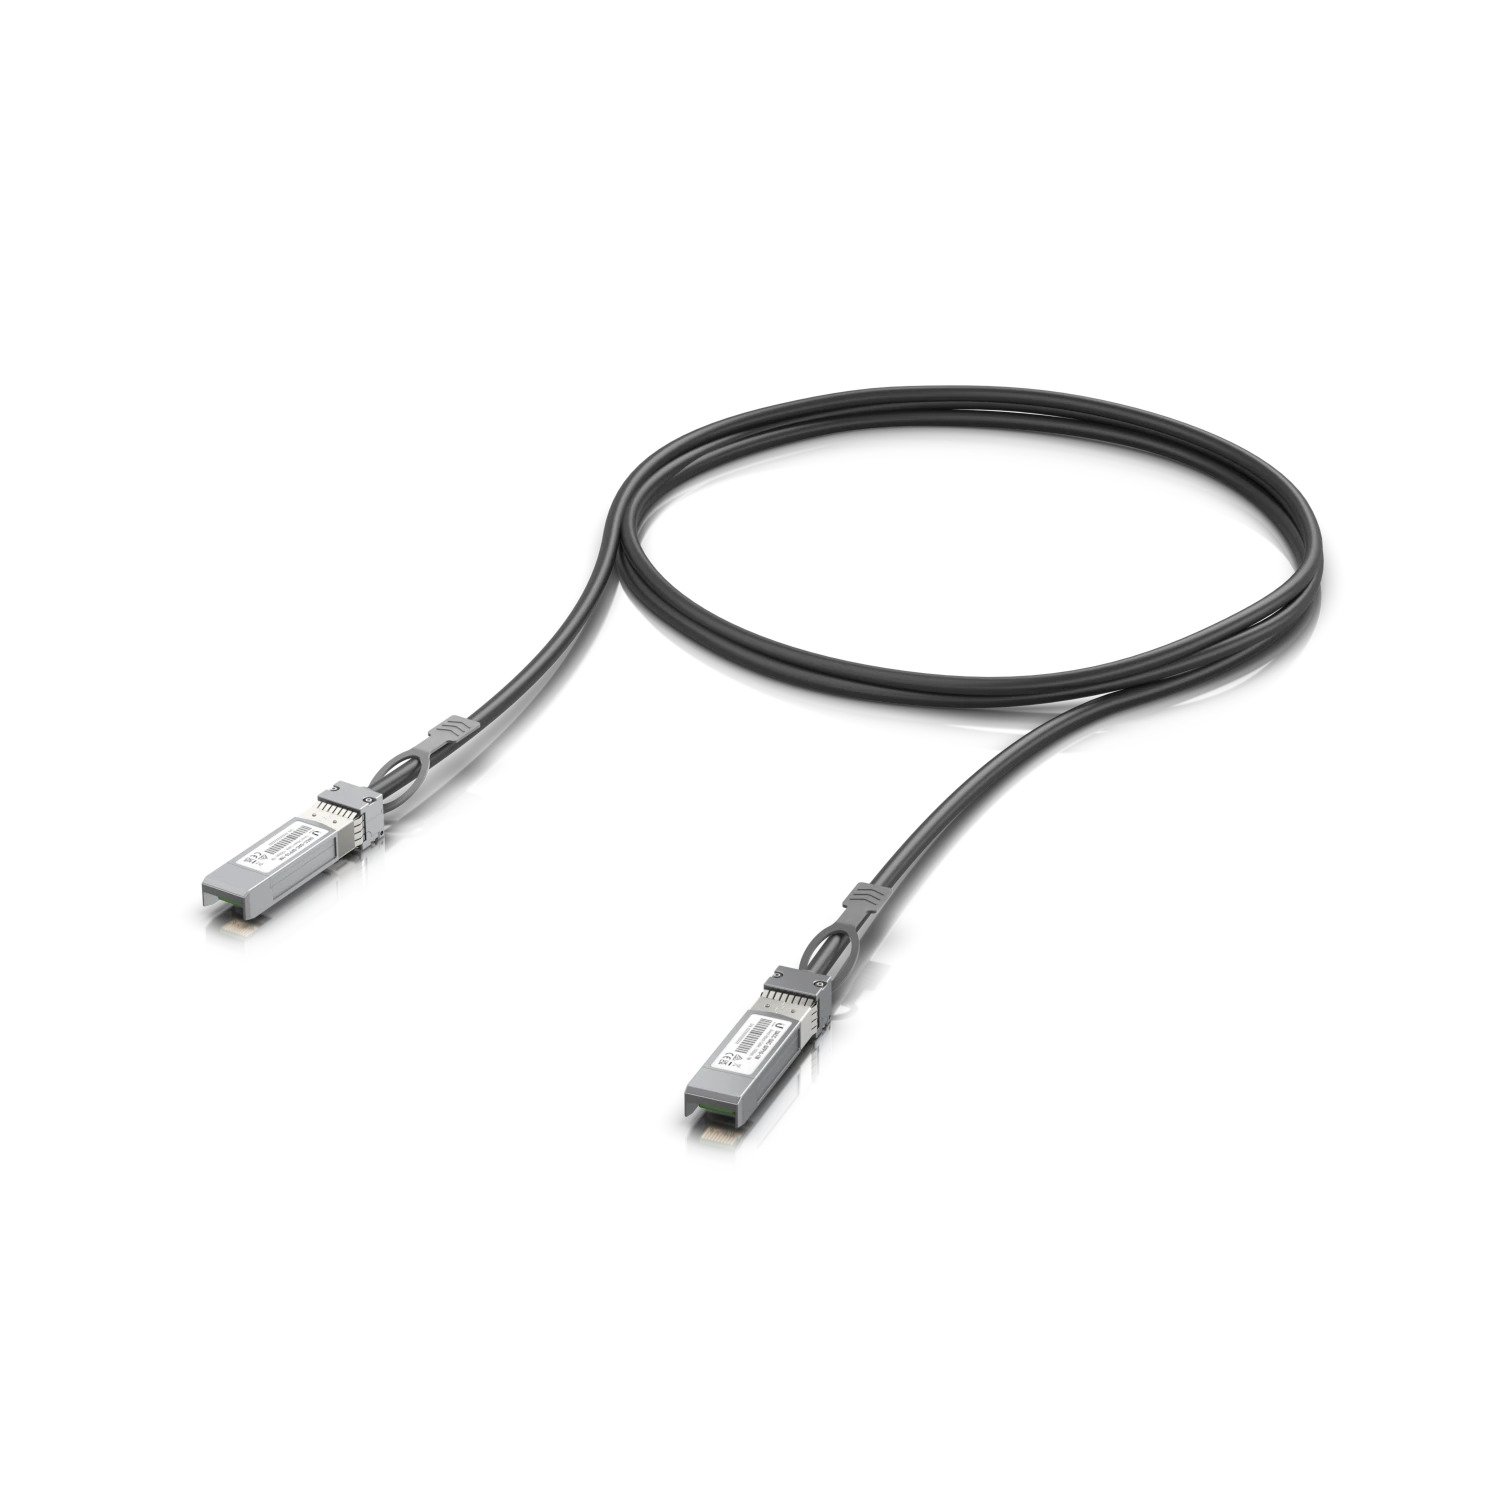 UDAC Cable, SFP+, 10Gbps, 1m, carton of 50 ea